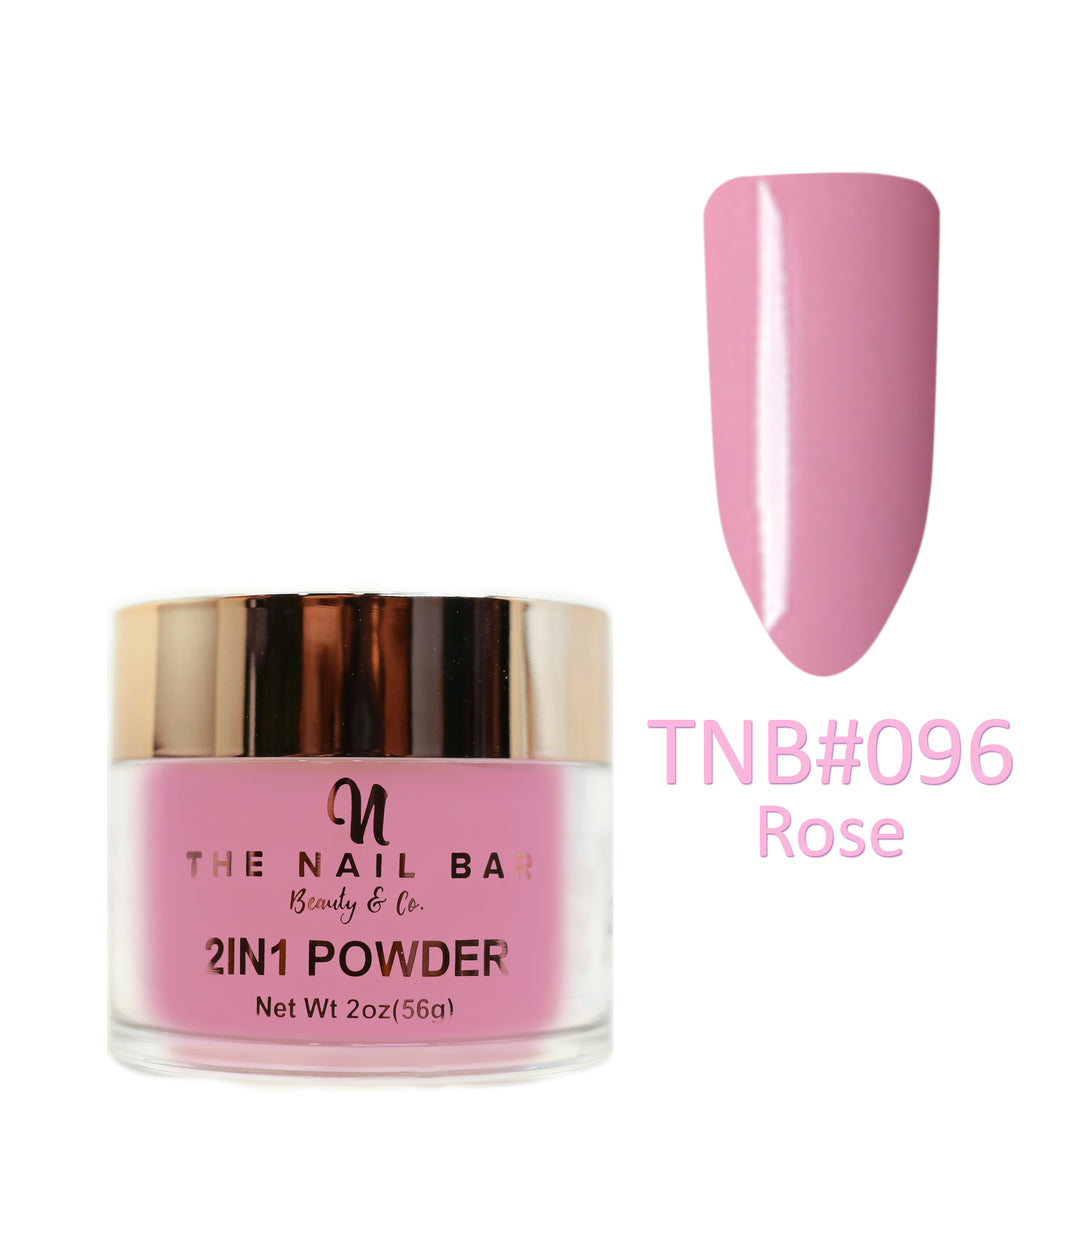 2-In-1 Dipping/Acrylic colour powder (2oz) -Rose - The Nail Bar Beauty & Co.